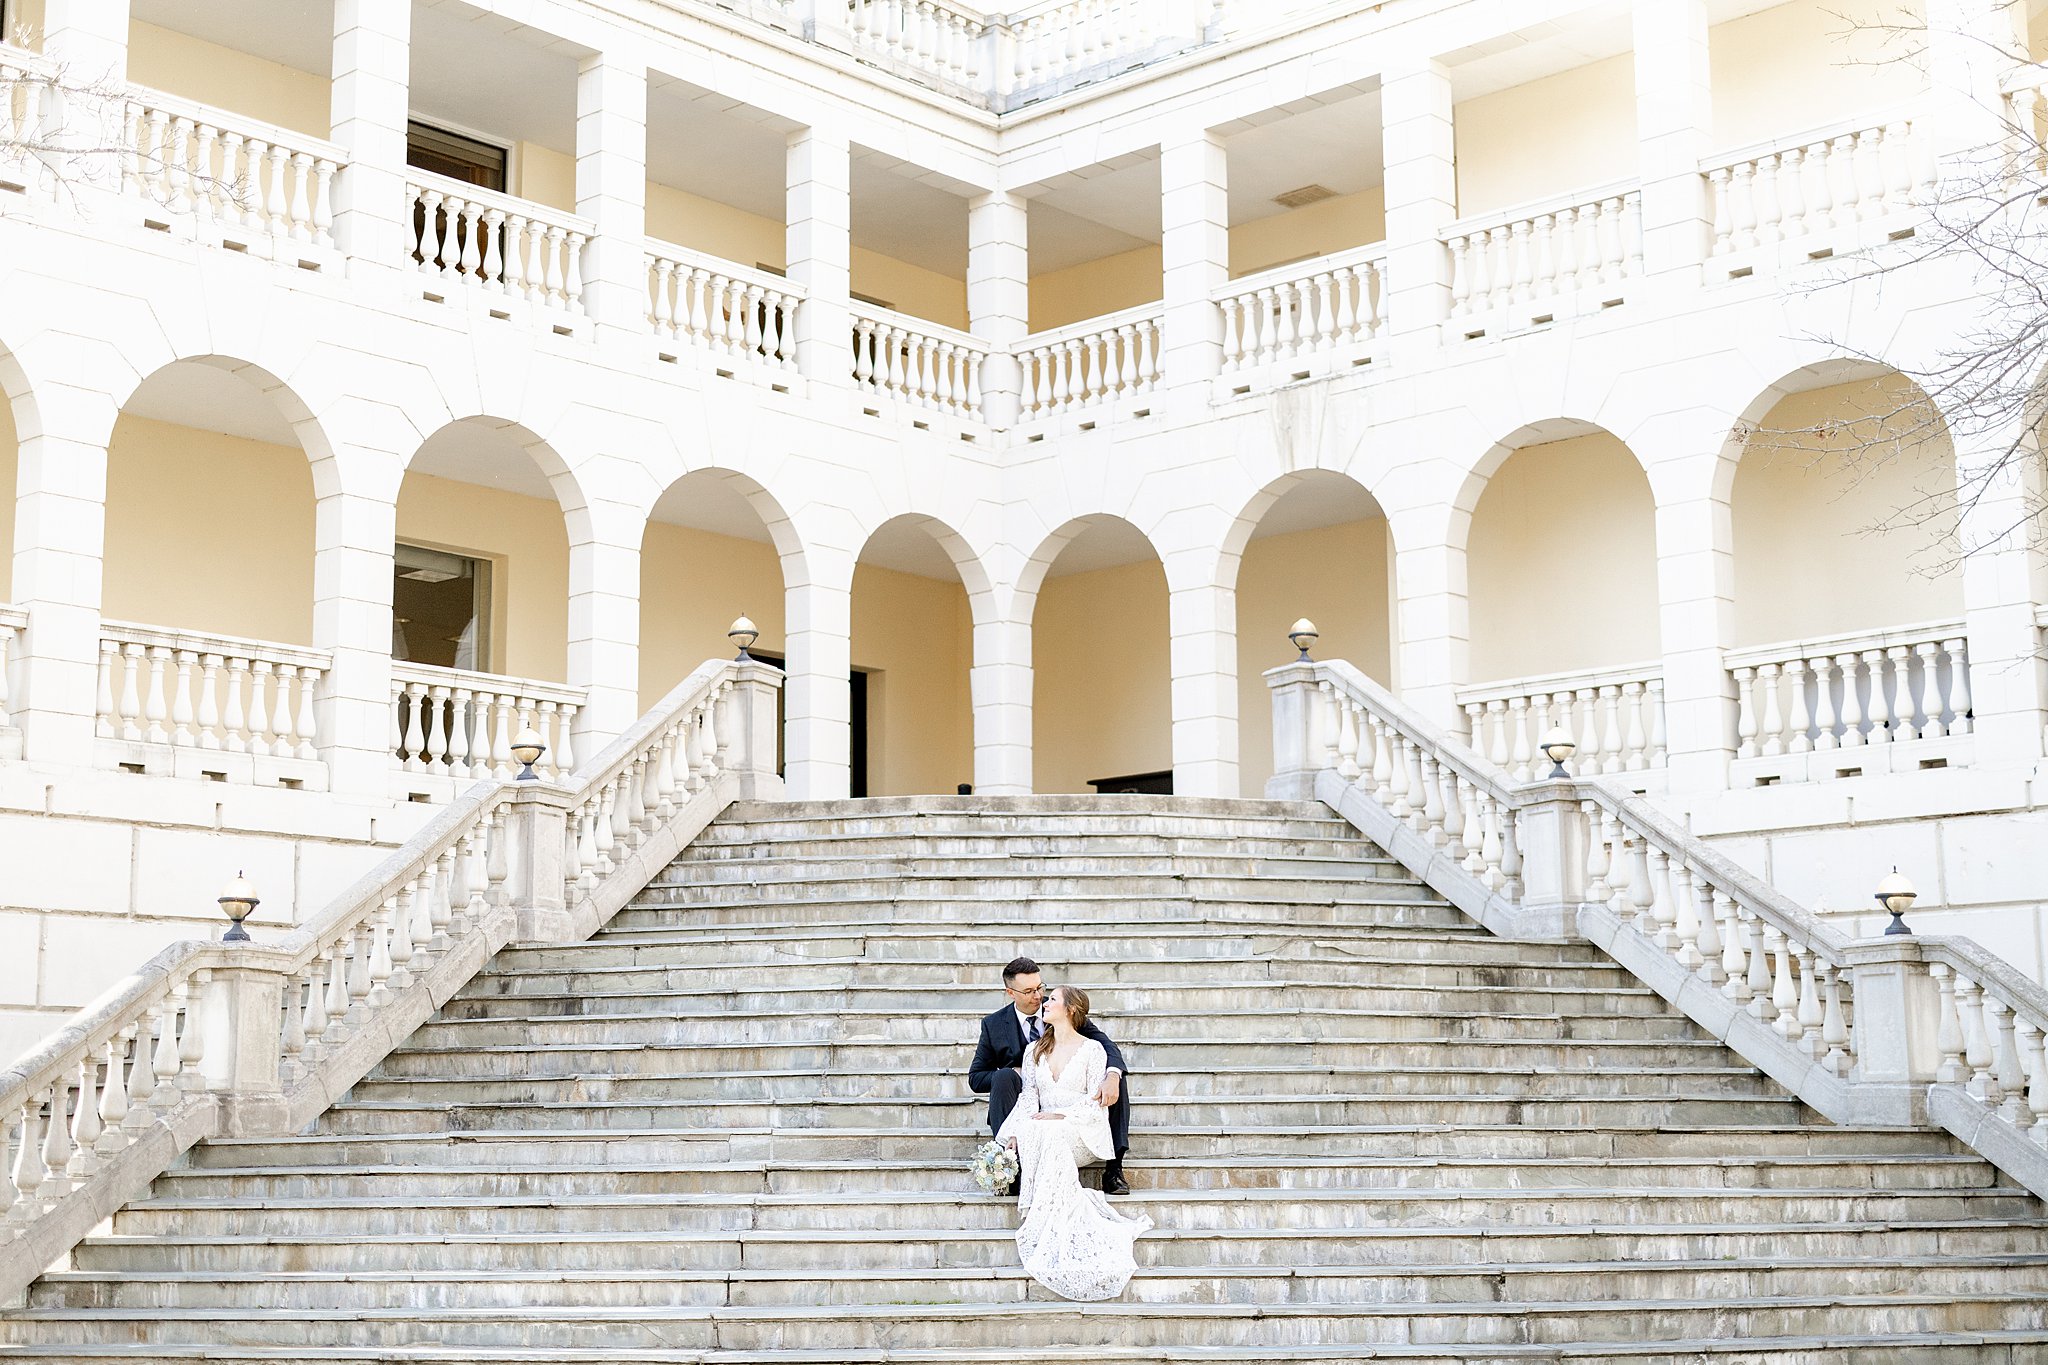 Newlyweds sit on a grand staircase of a large ornate archway building virginia elopement